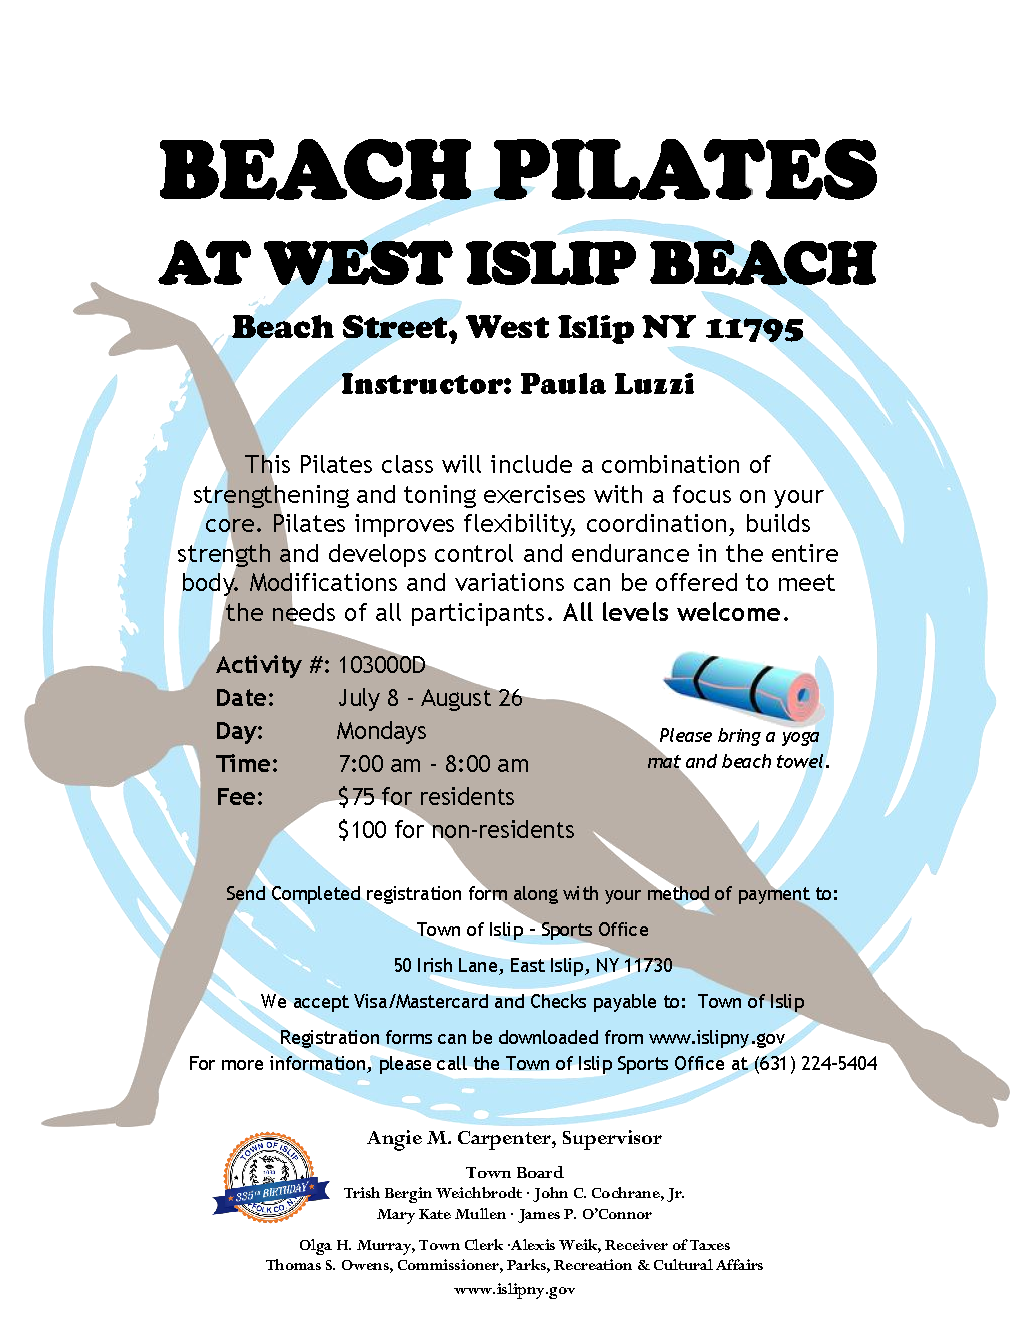 a flyer announcing beach pilates classes,  call (631) 224-5404 for more information.